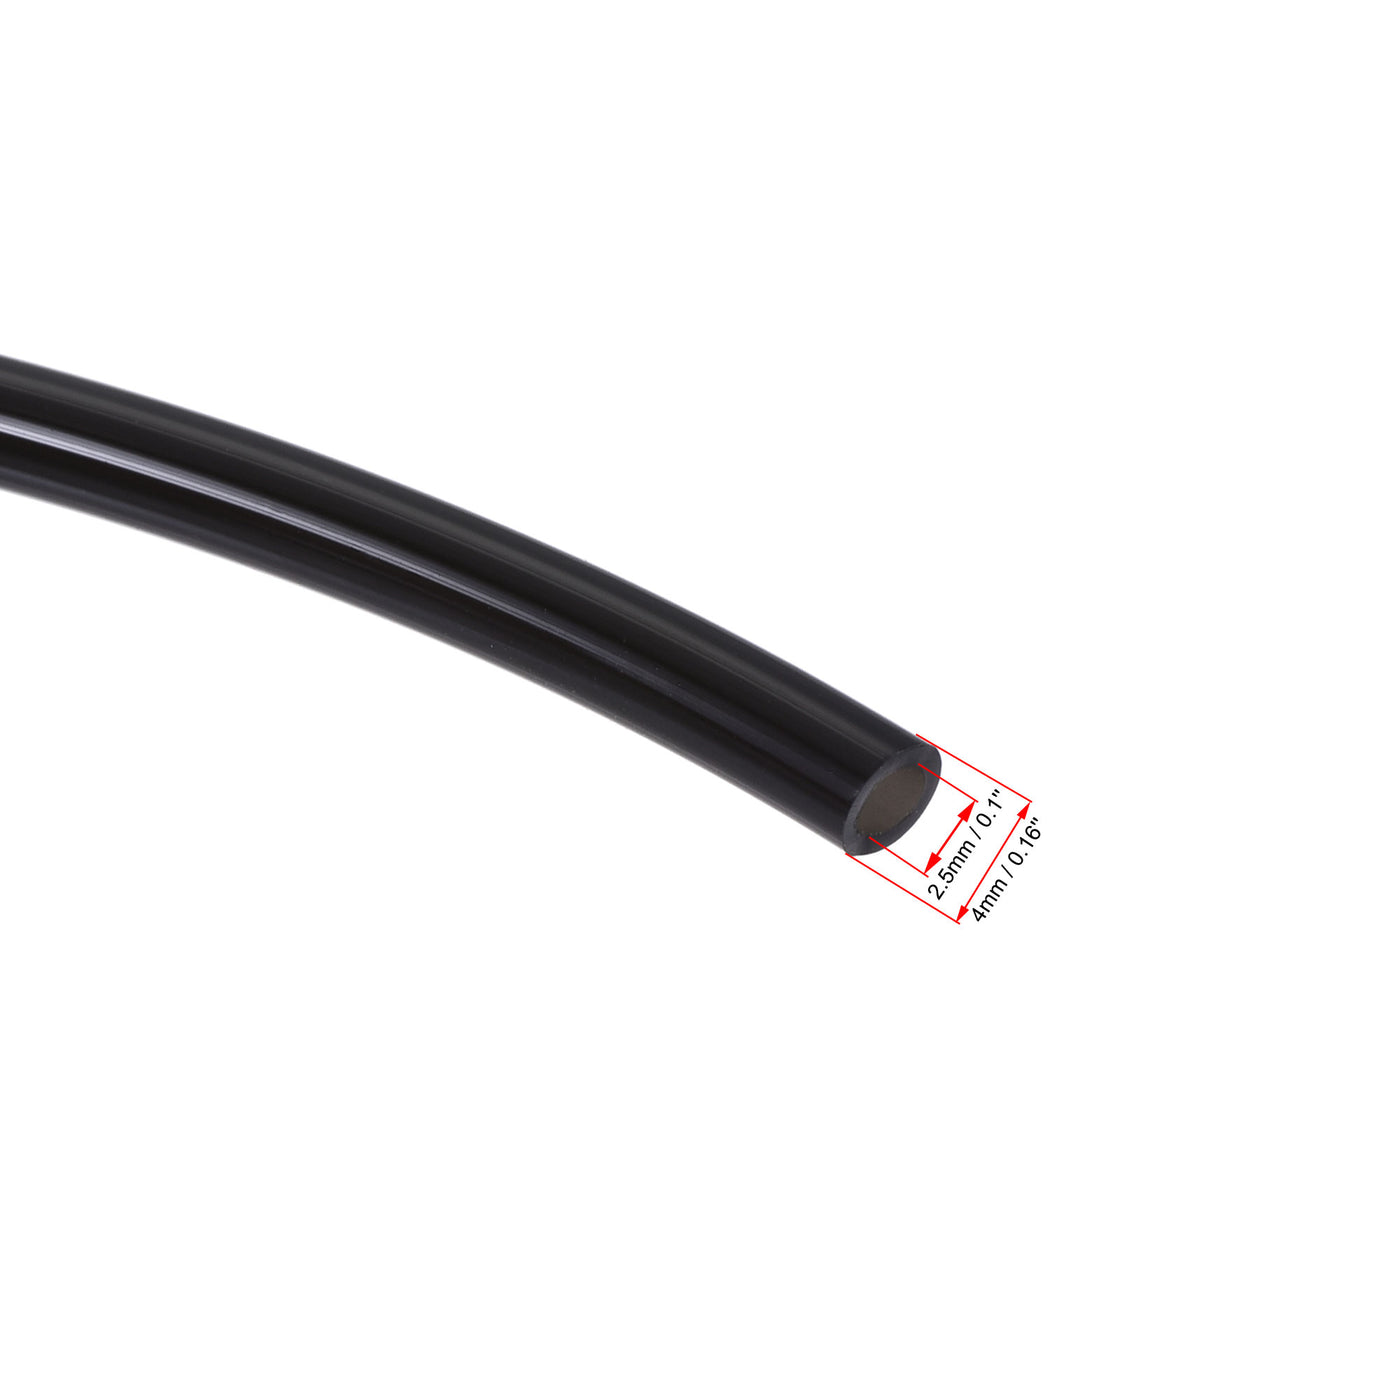 uxcell Uxcell Pneumatic 4mm OD PU Air Tubing Kit Hose Air Line Tubing 10M Black with Push to Connect Fittings